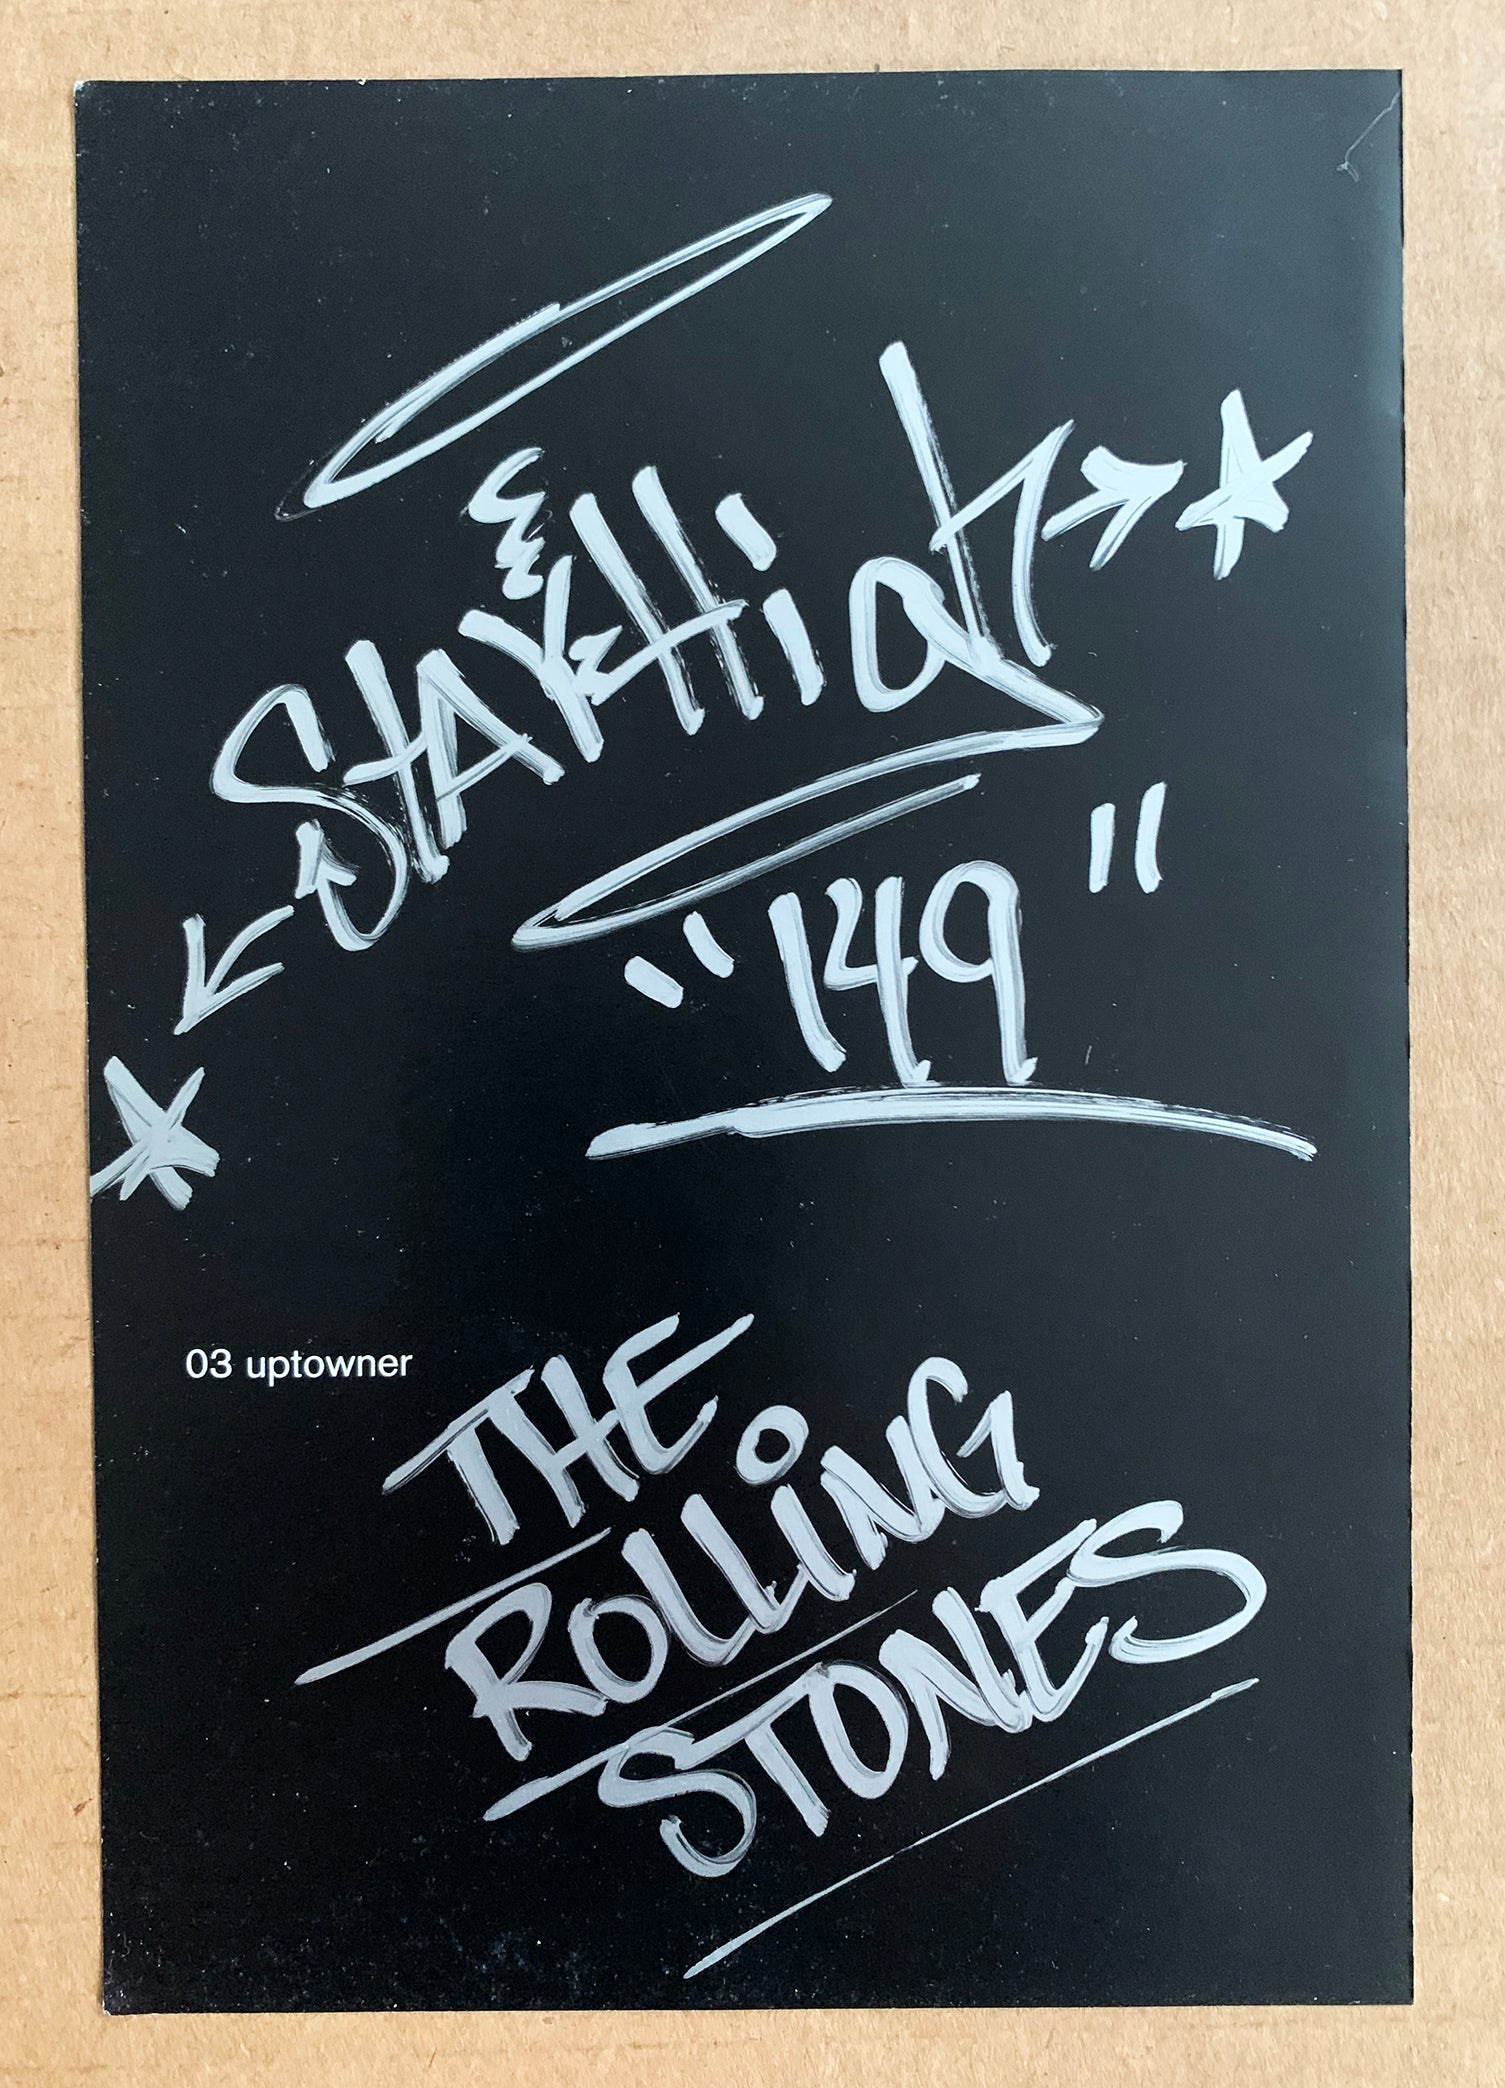 STAYHIGH 149 -"Rolling Stones" 2-sided